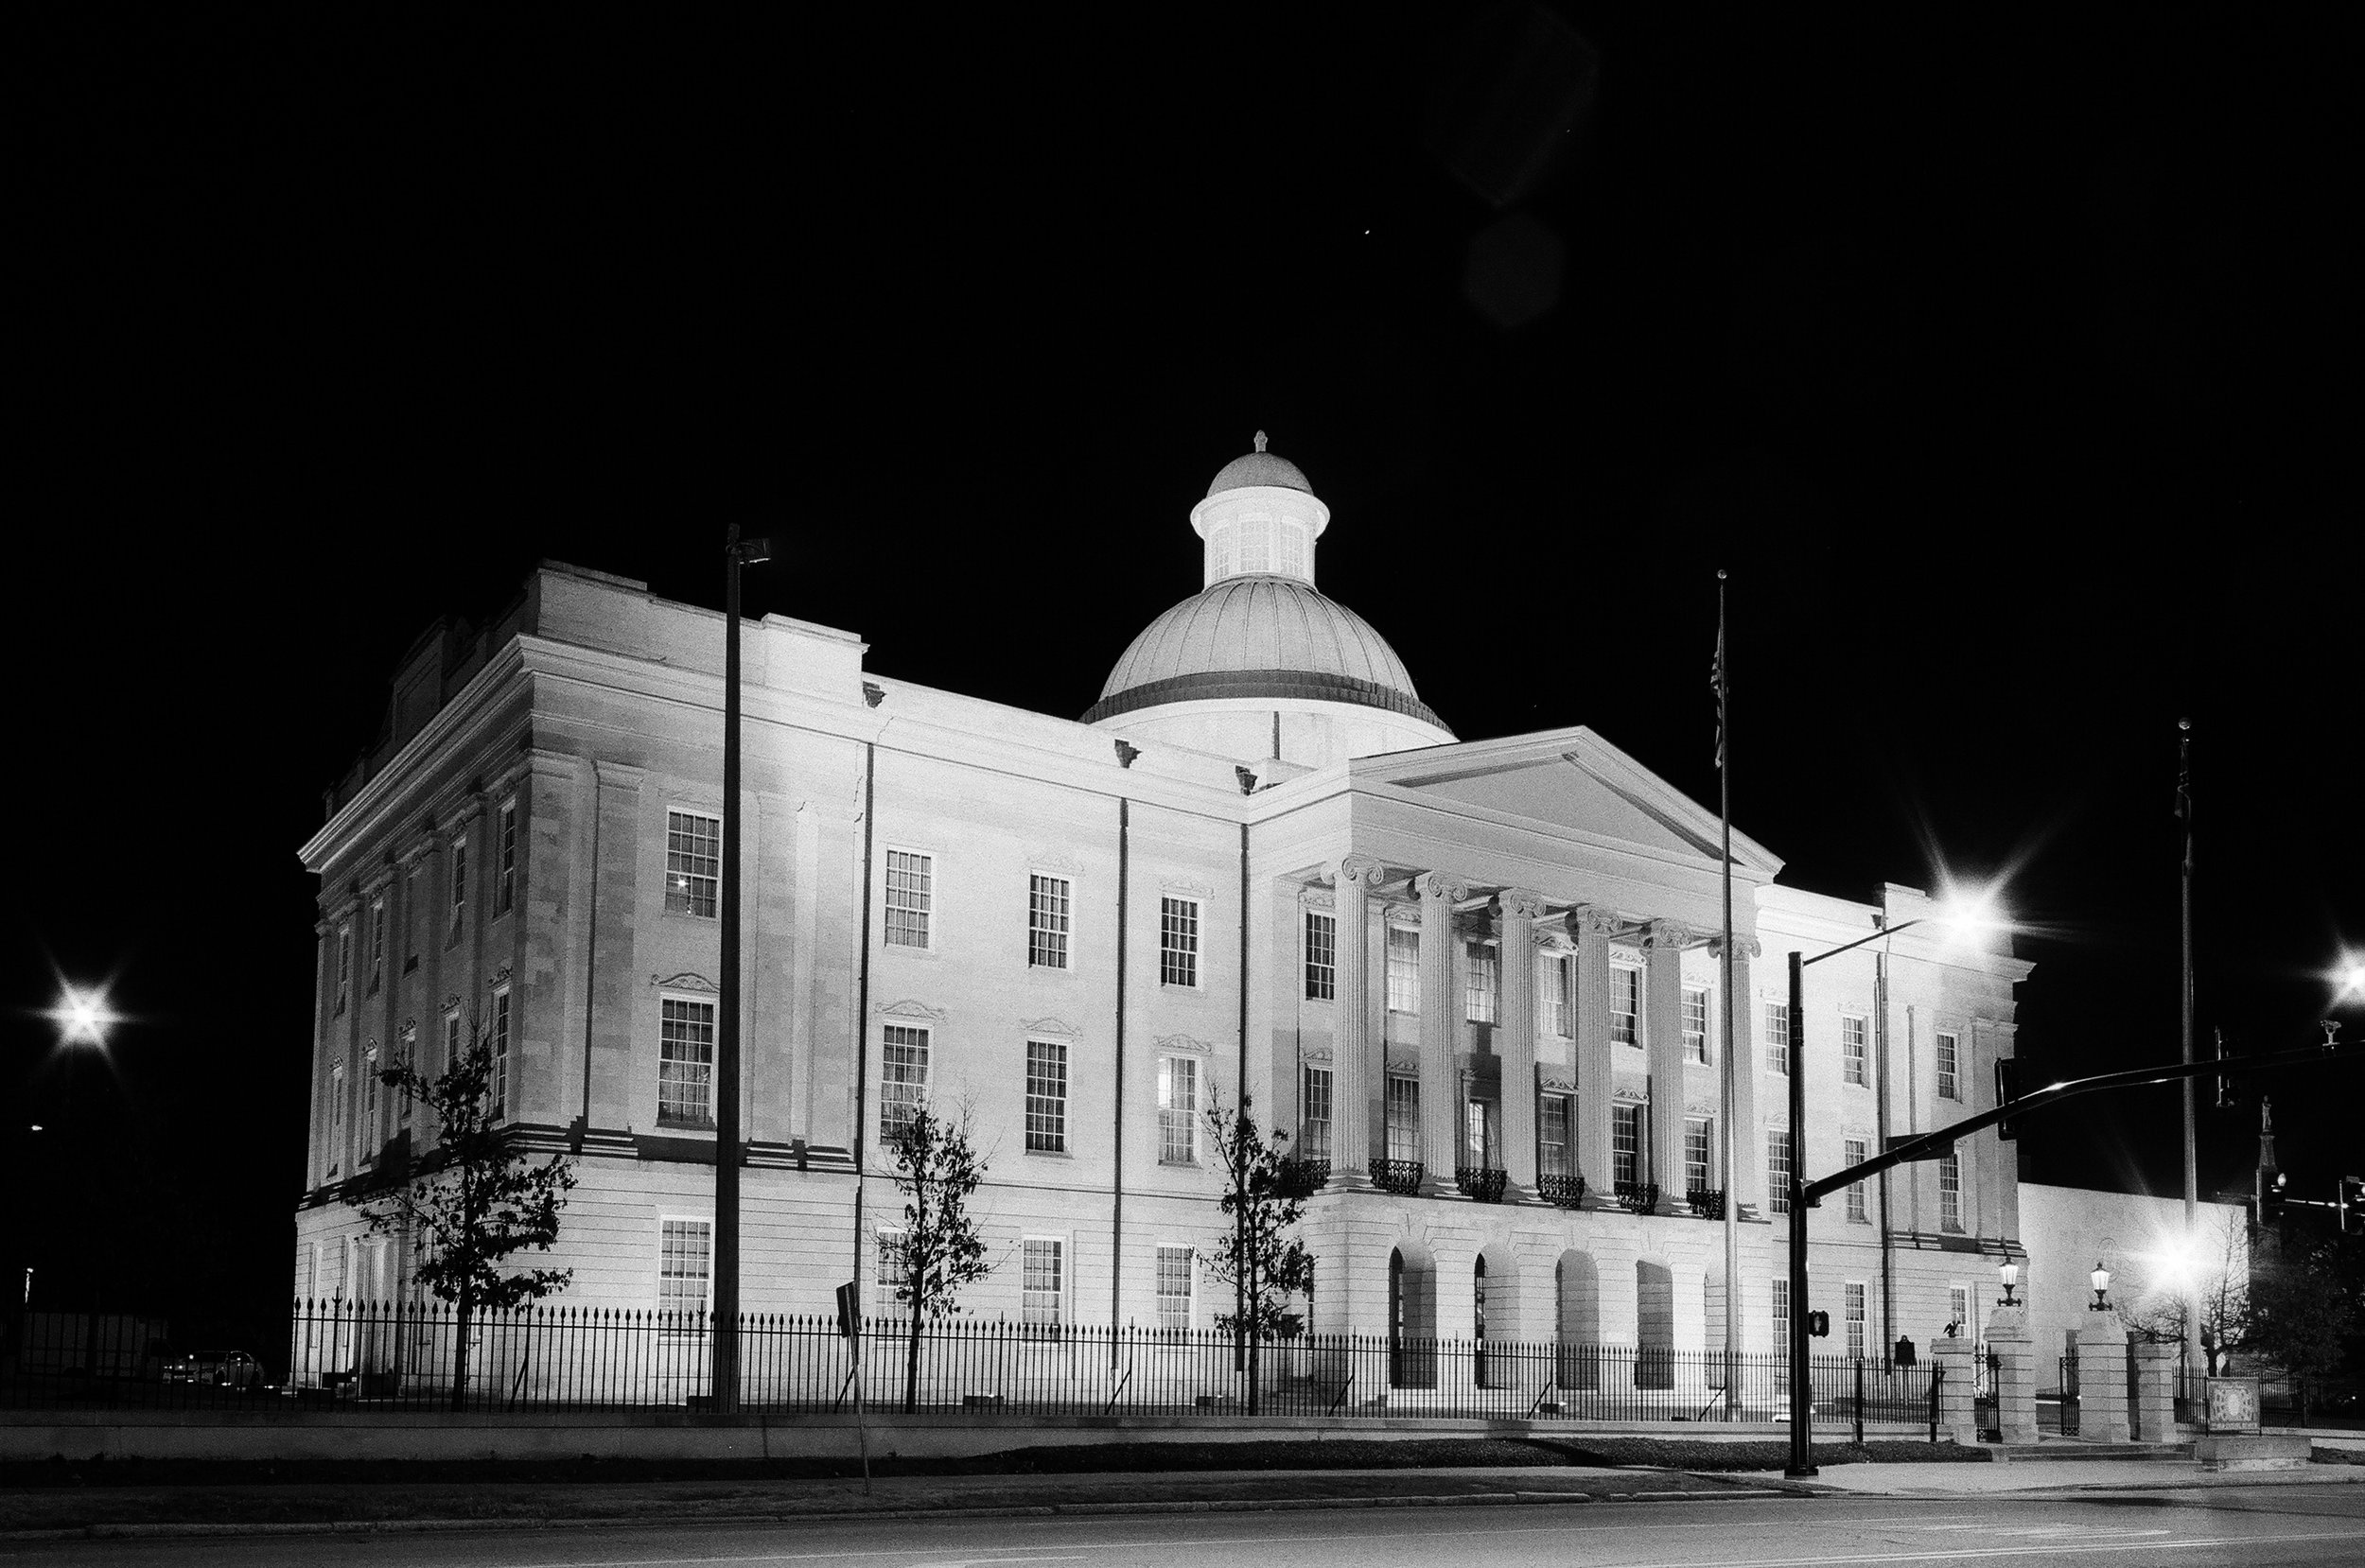  Old State Capitol in Jackson, Mississippi -&nbsp;captured on Ilford Delta 400 with a Contax G2 rangefinder camera and Contax 28mm Carl Zeiss lens. 